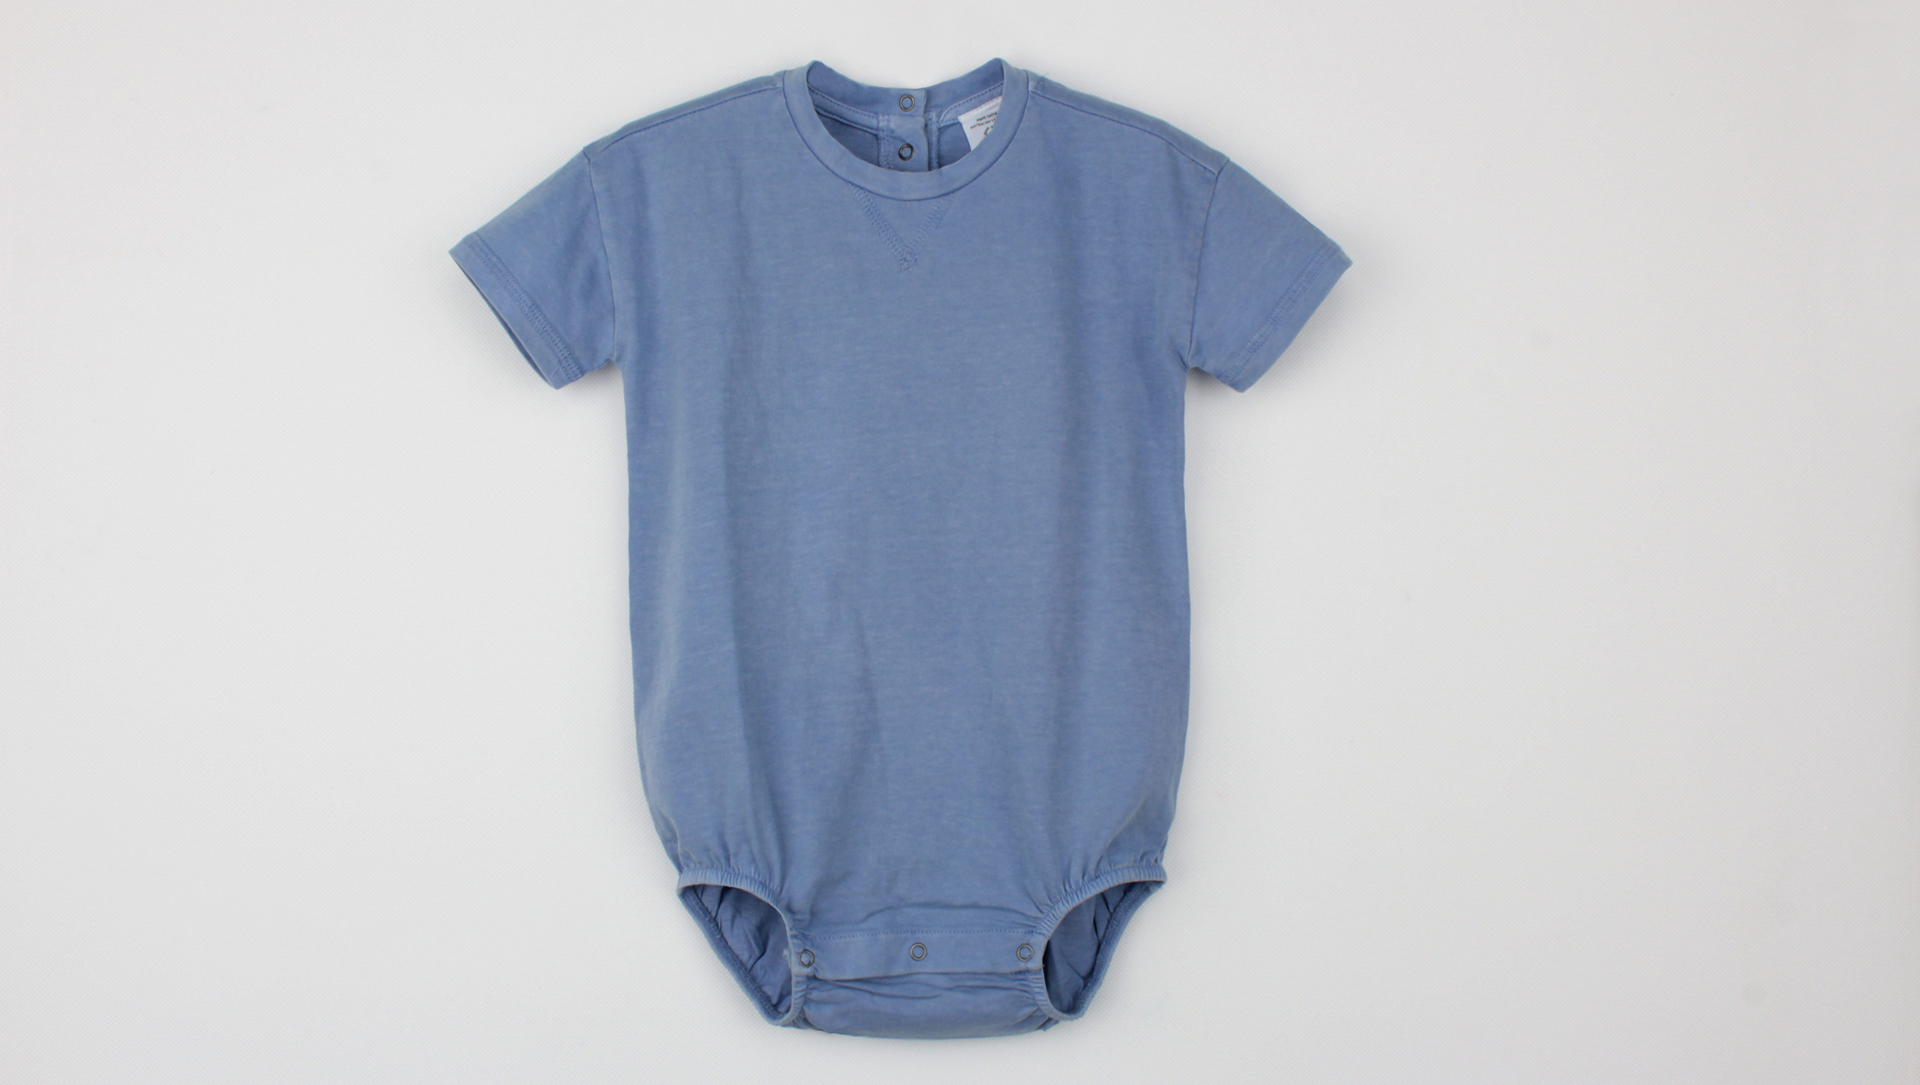 The Soft and Adorable Tabitha Flutter Tee, Perfect for Your Little One